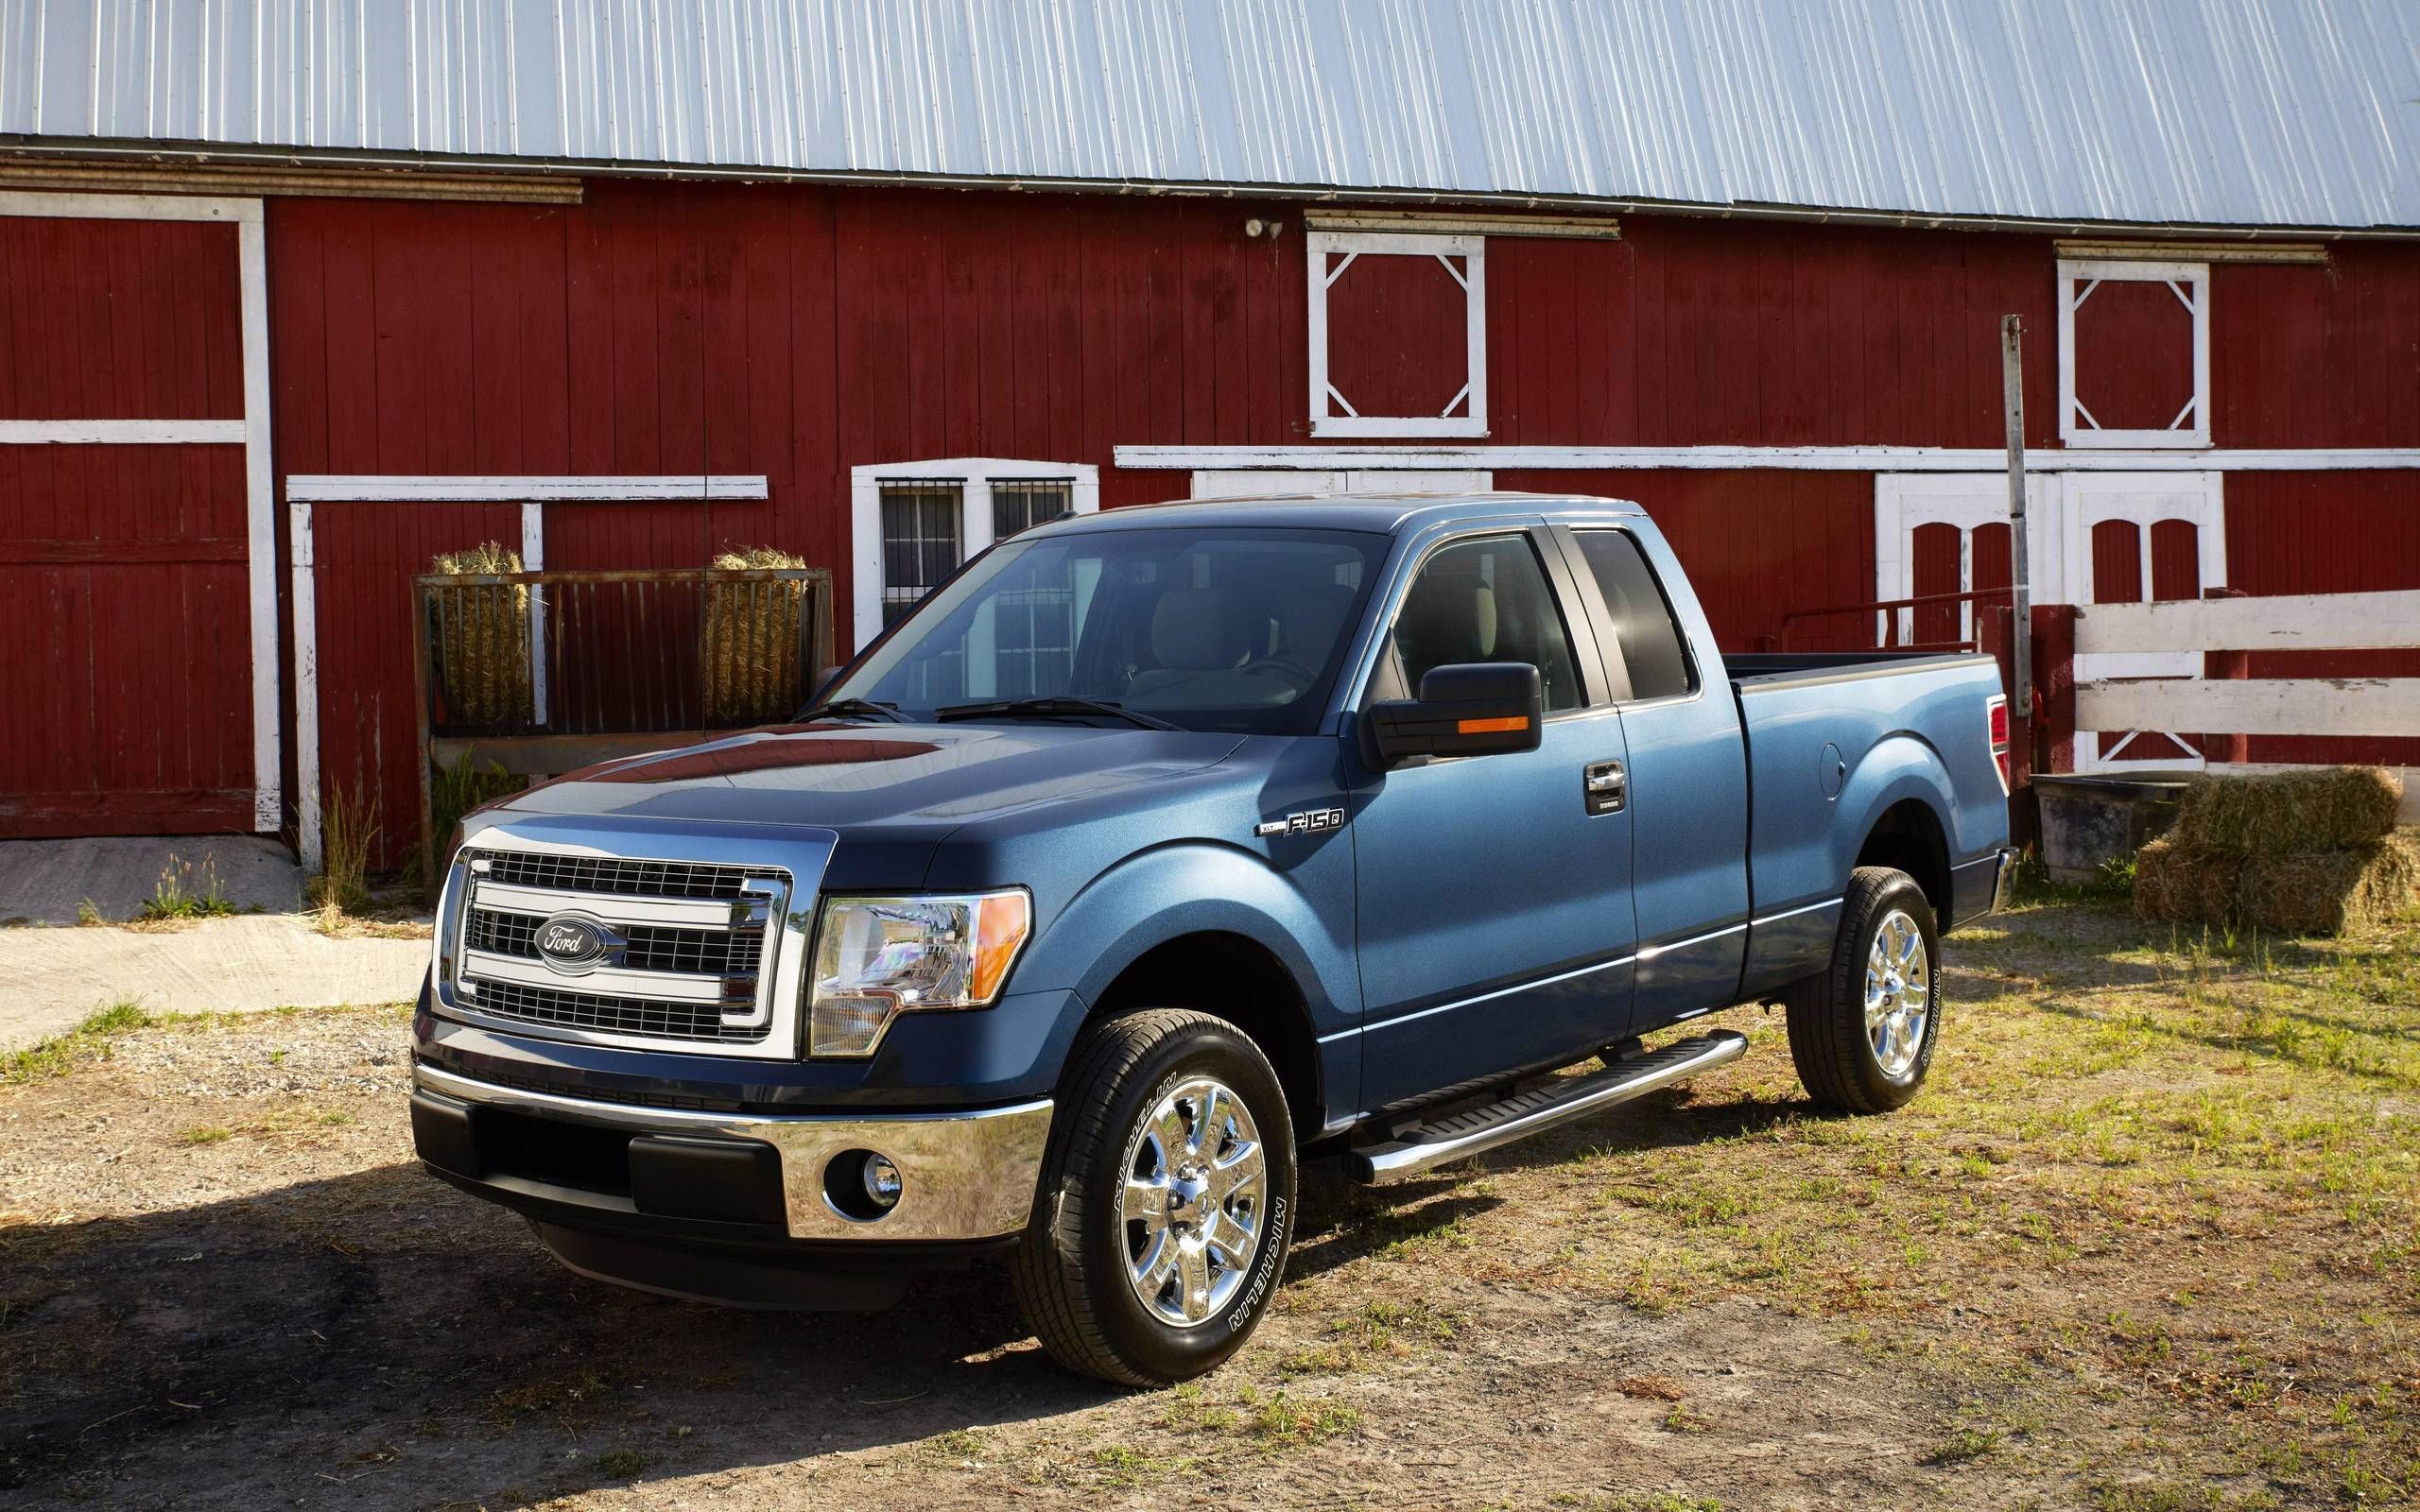 2014 Ford F-150 XLT Supercab review notes